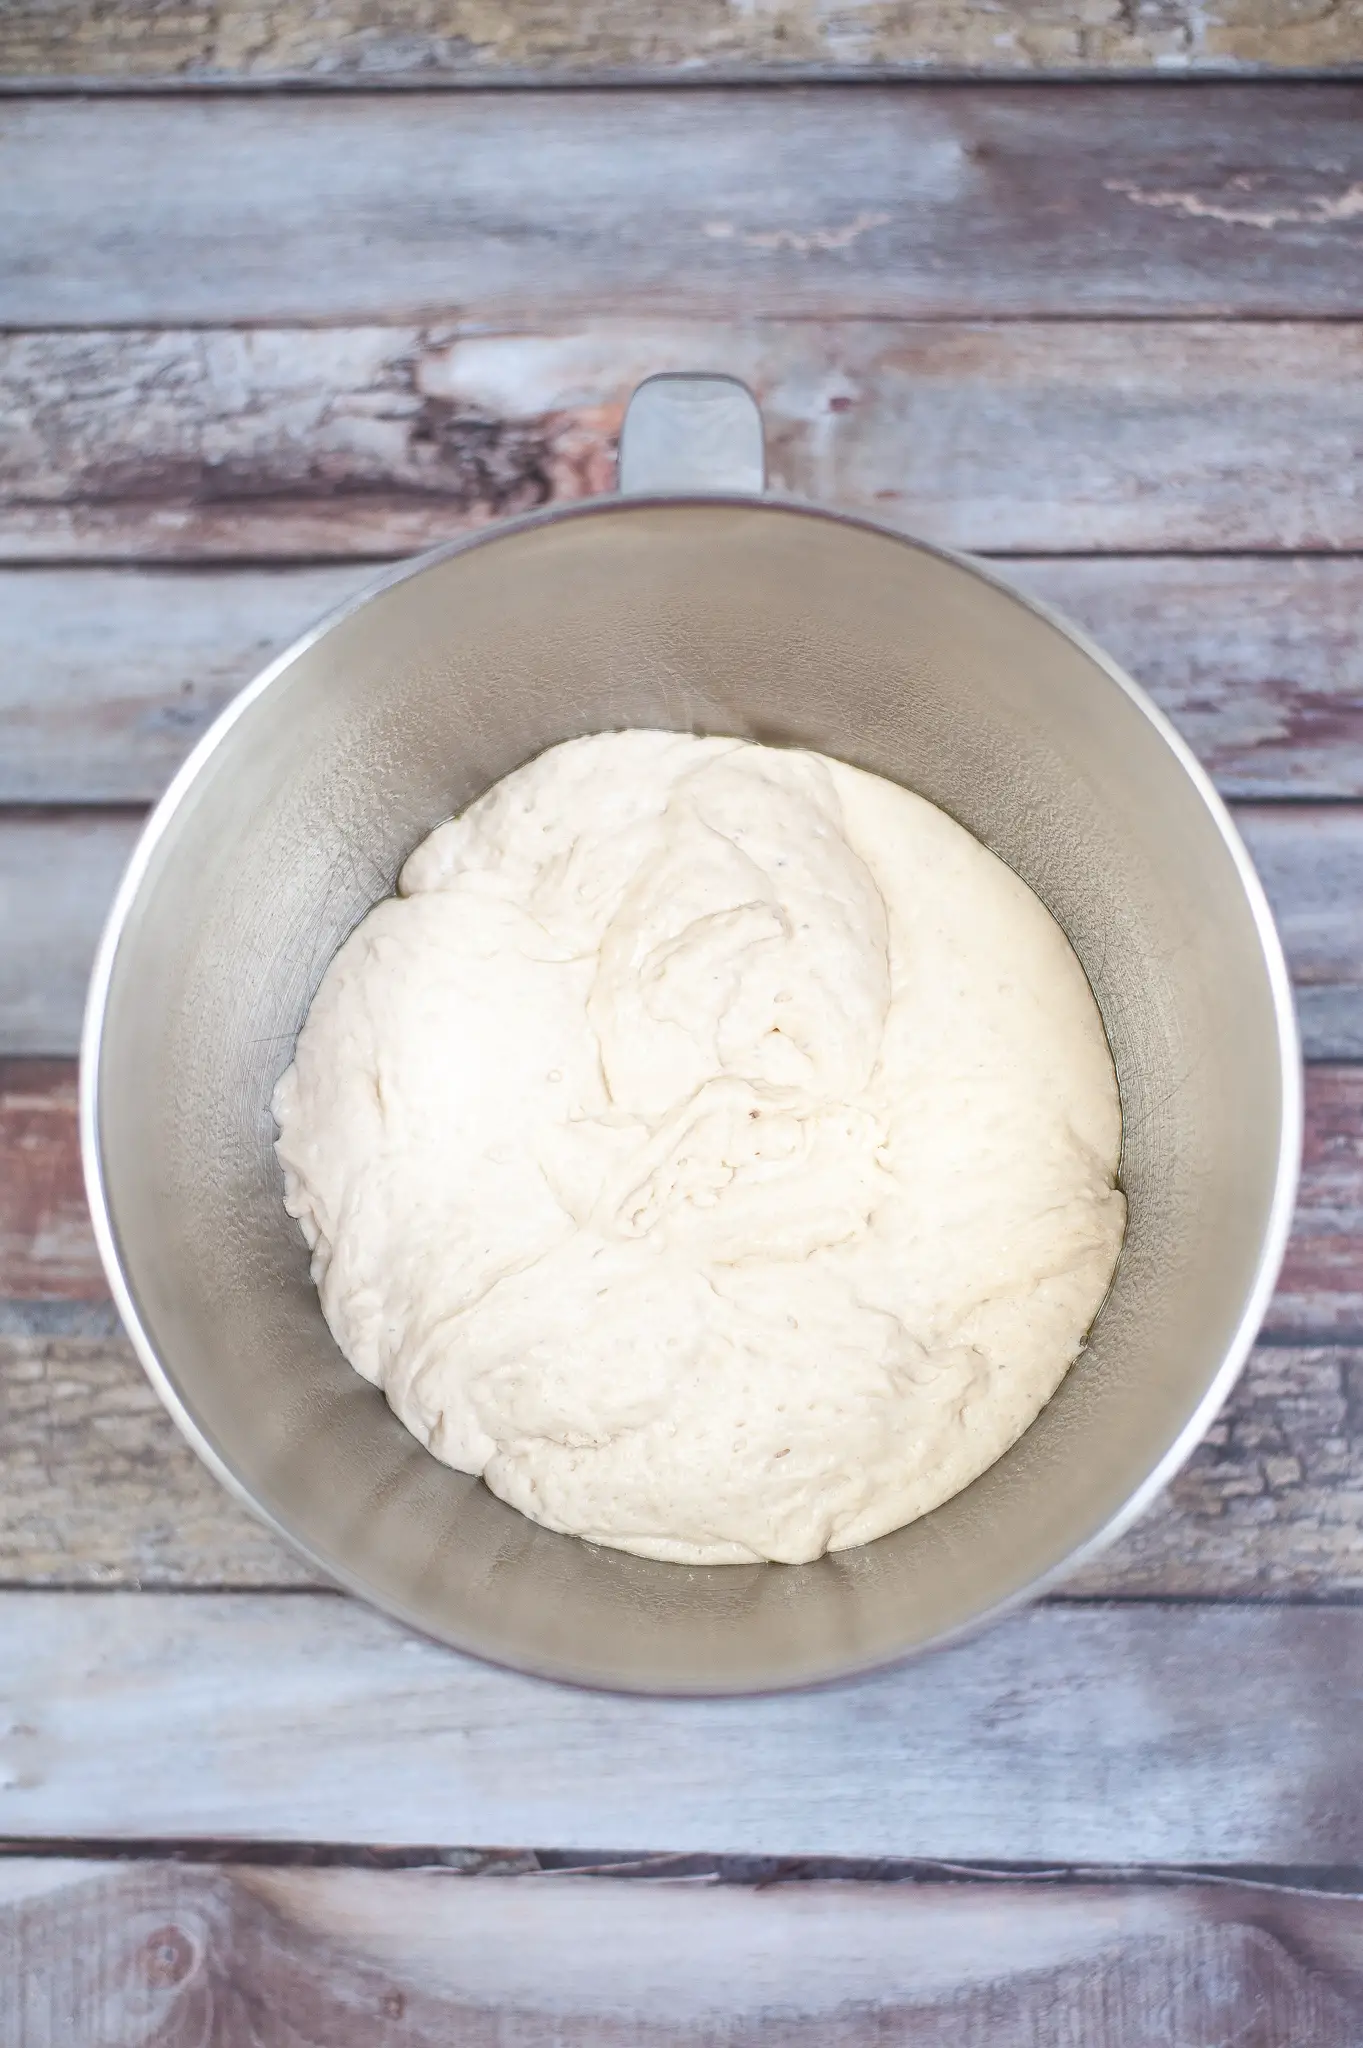 Uncooked pizza dough in a mixing bowl.